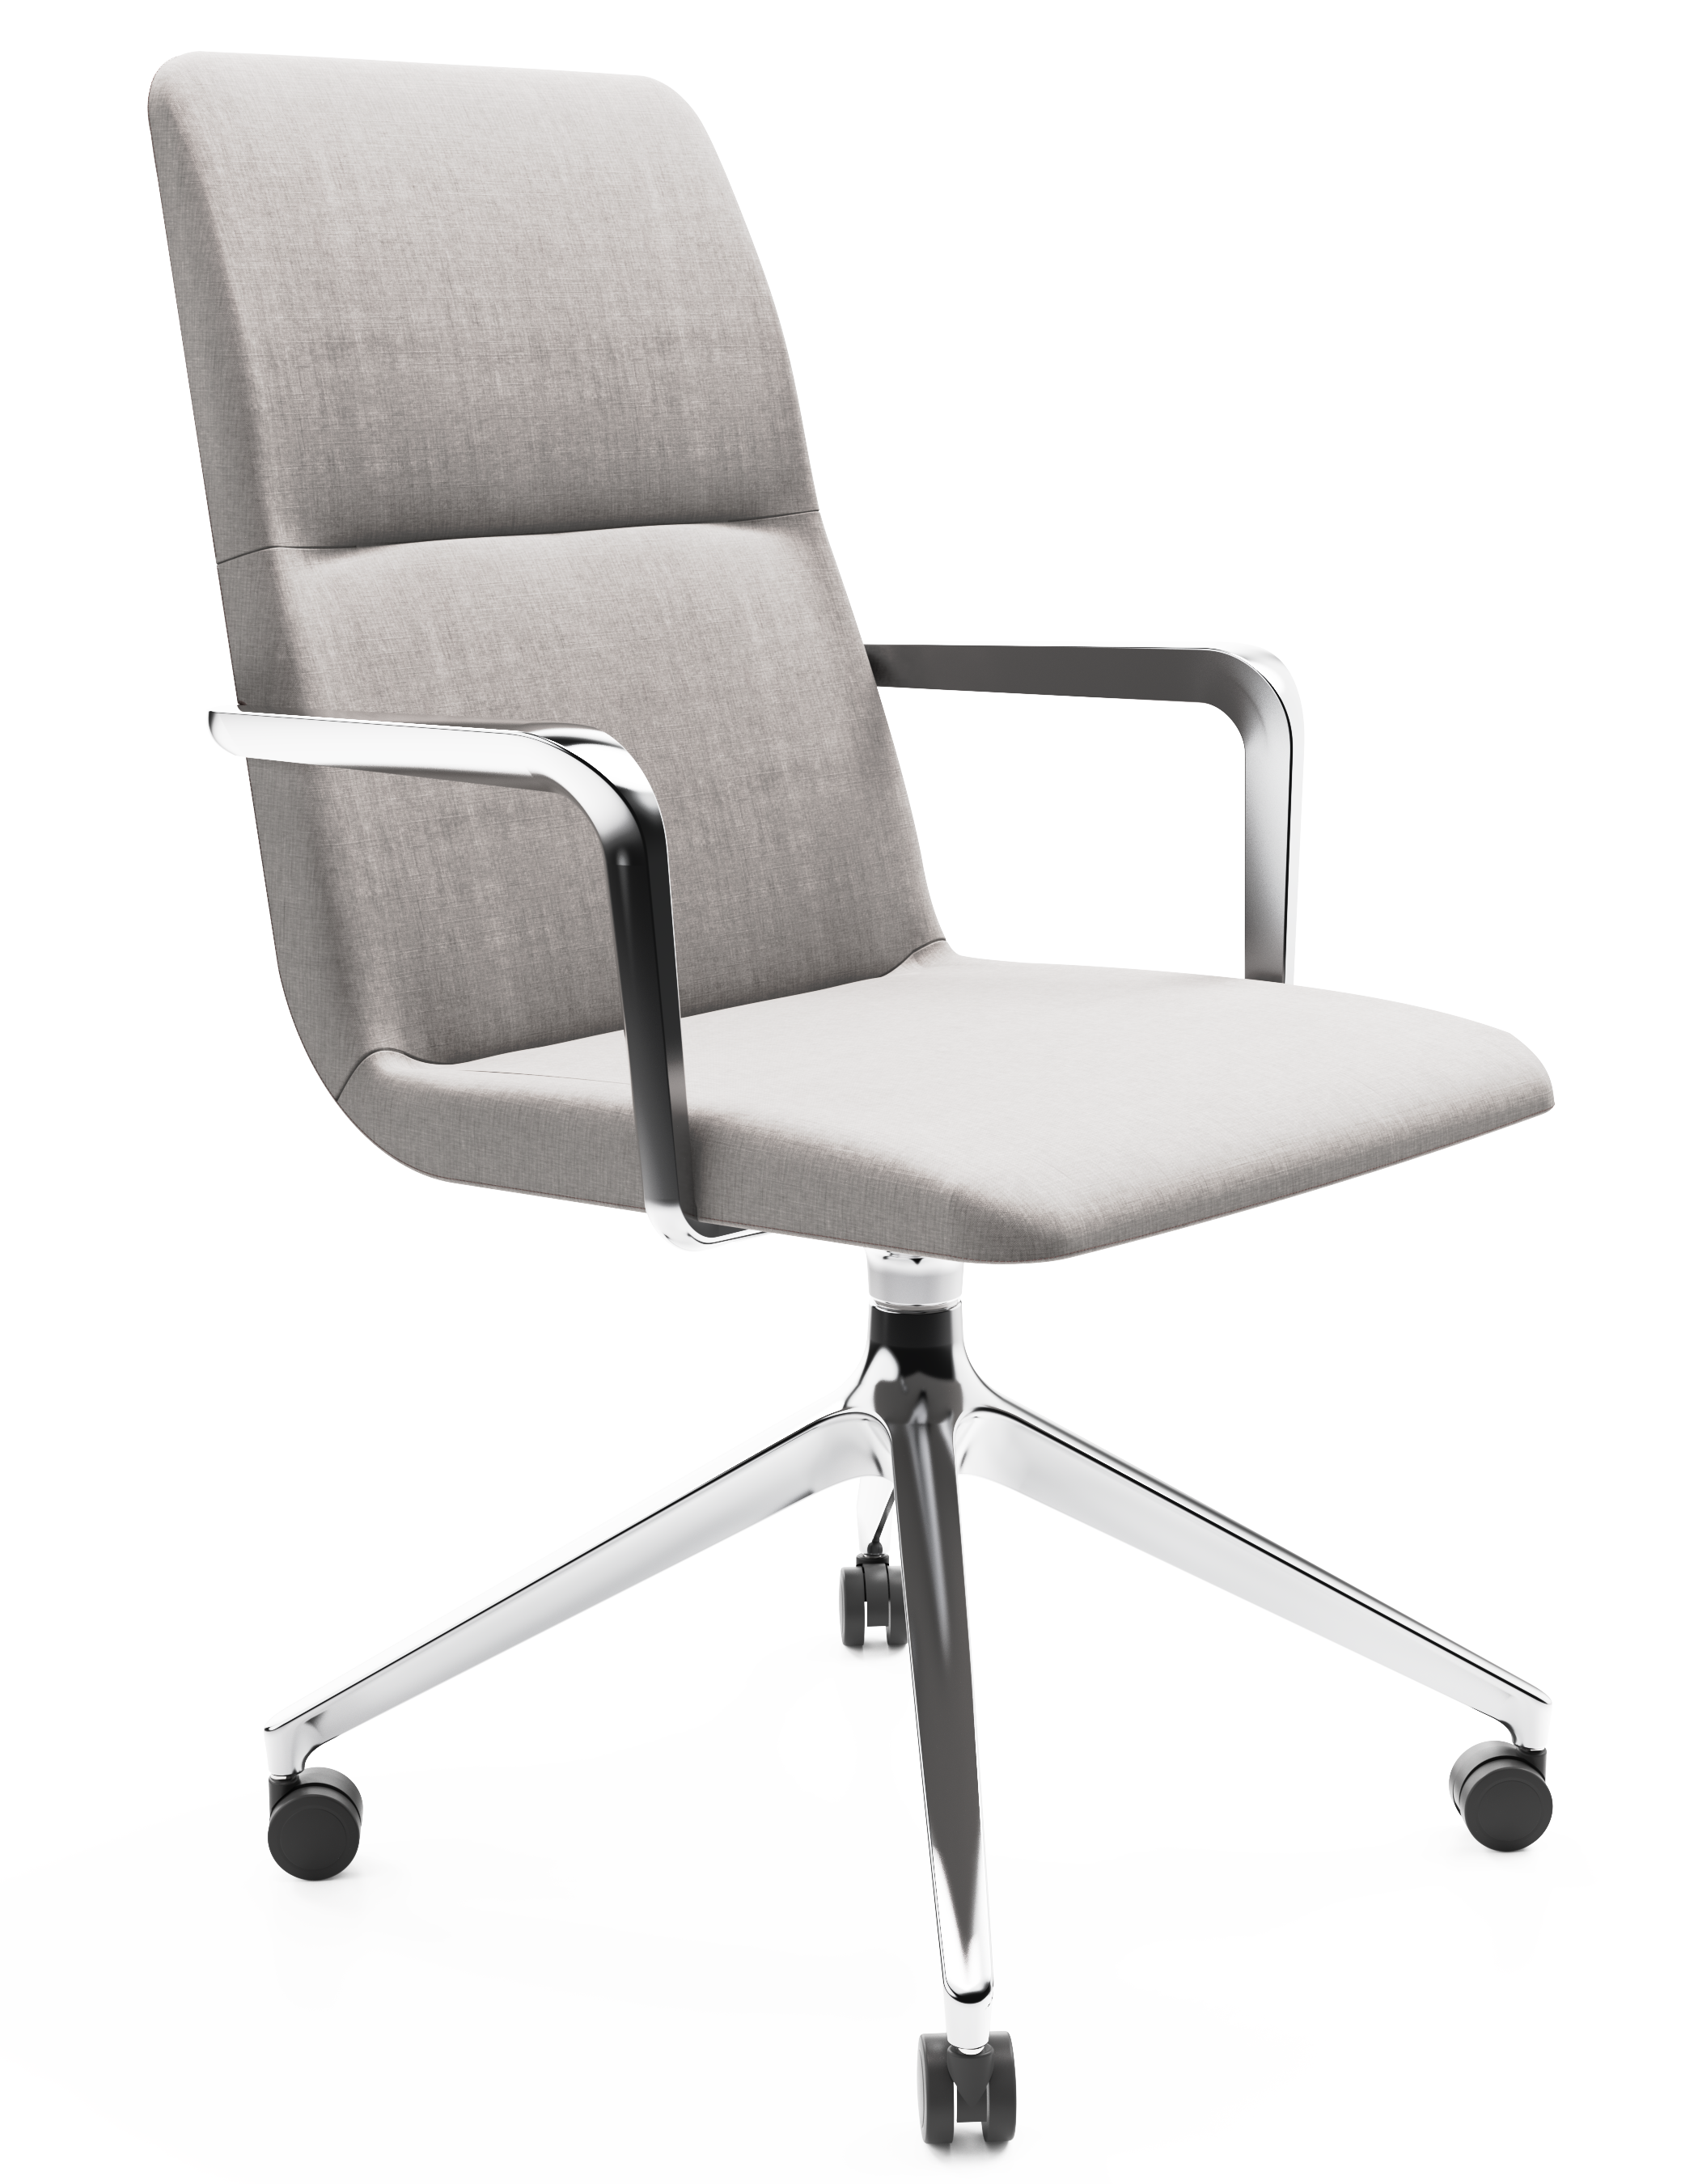 WS - Accord with arms 4 star pyramid base chair with castors - chrome - remix 126 - front angle